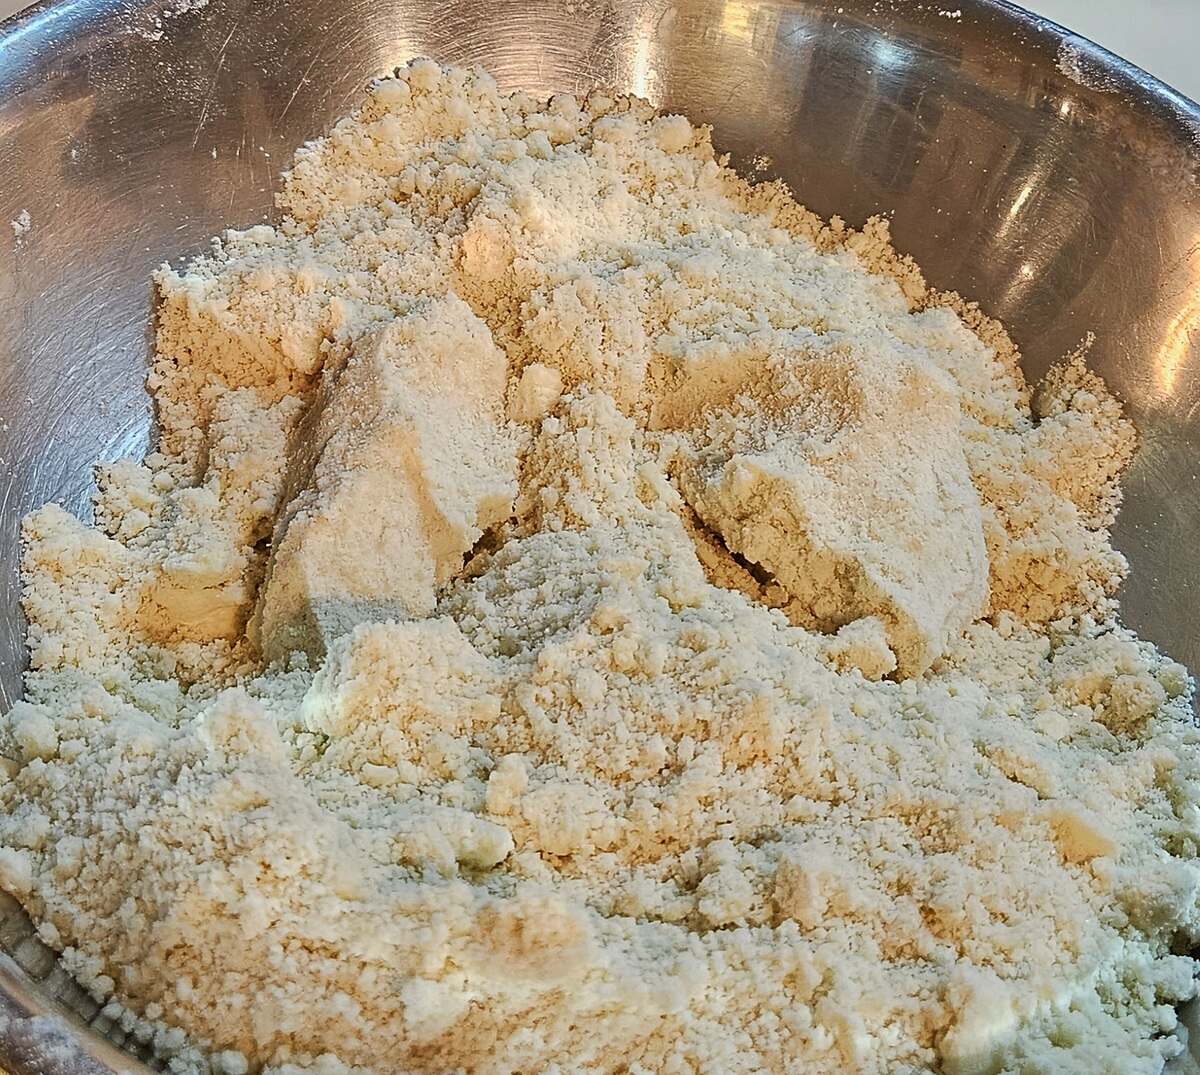 flour and butter mixture in a mixing bowl, handful sized clumps to how proper consistency